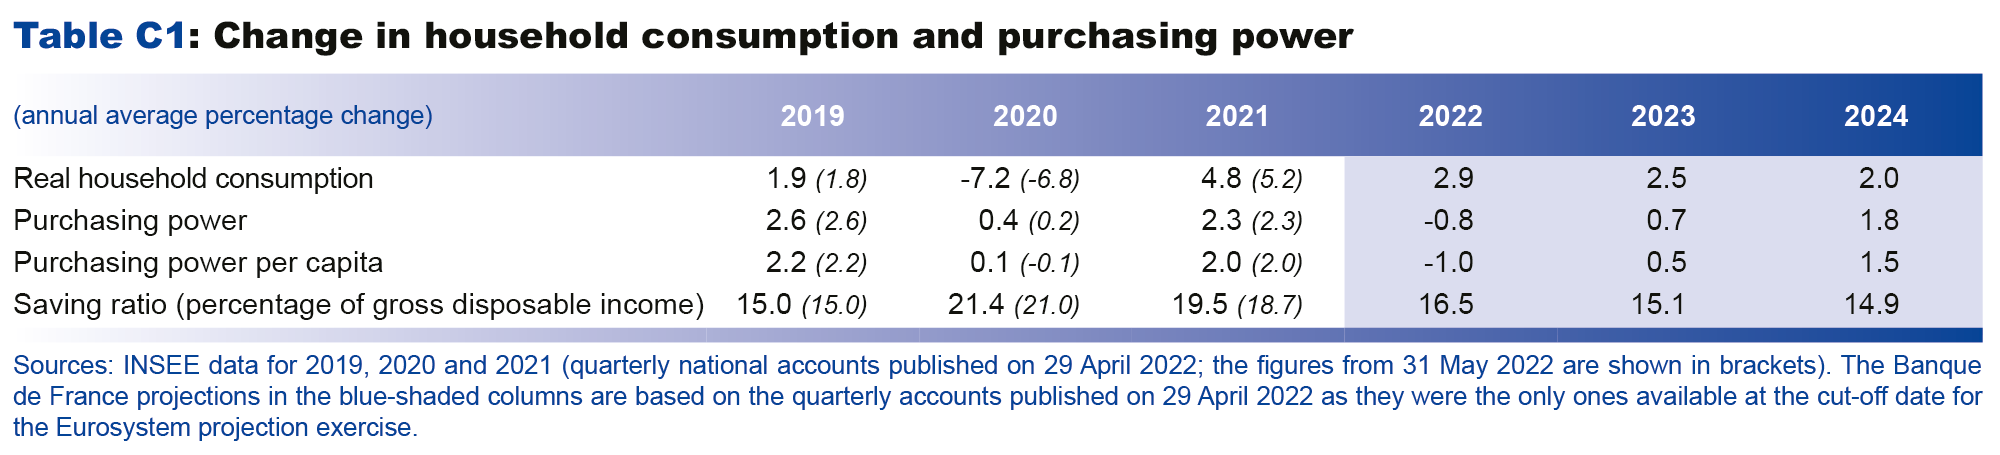 Macroeconomic projections – June 2022 - Change in household consumption and purchasing power